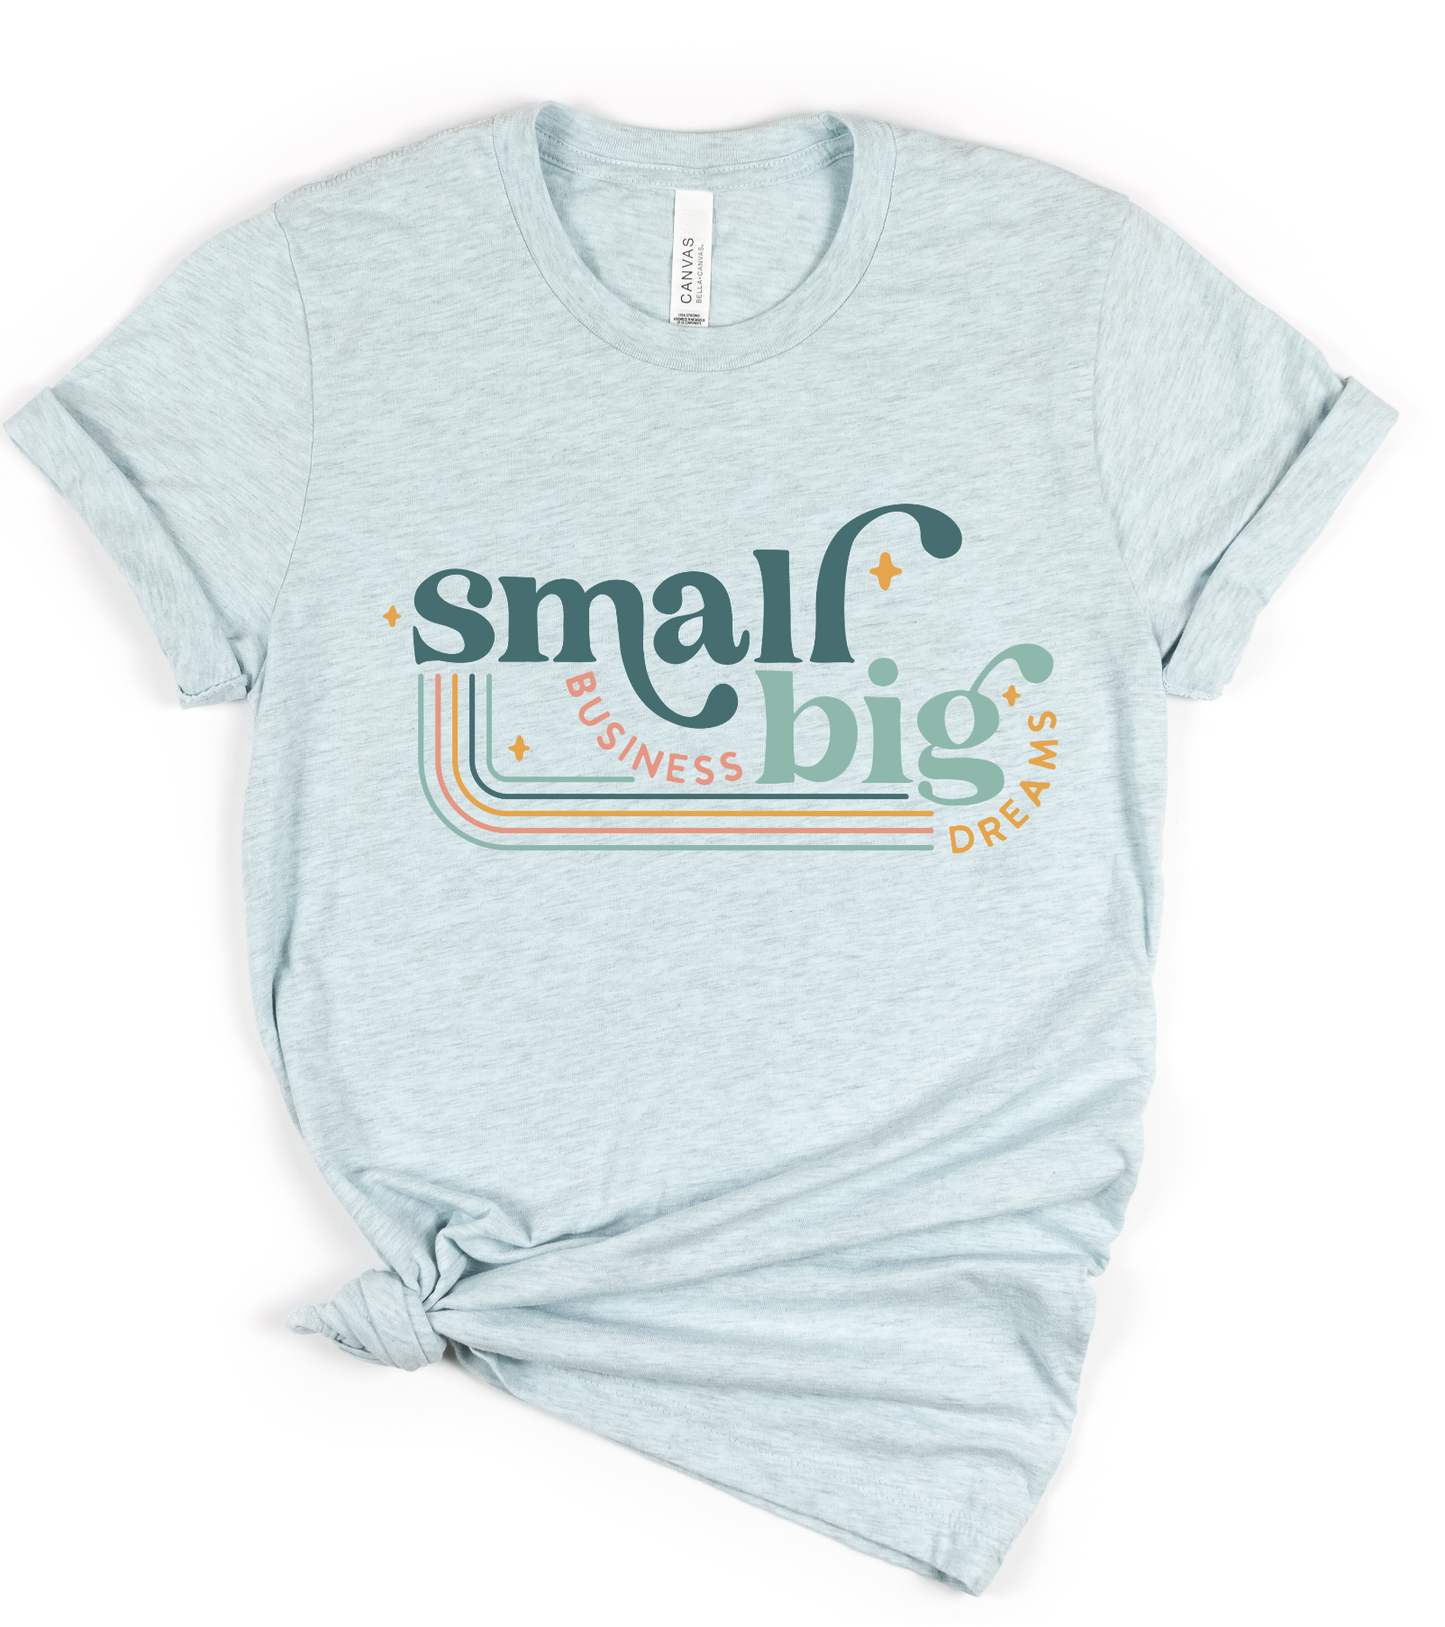 Small Business Big Dreams LAST CHANCE DTF